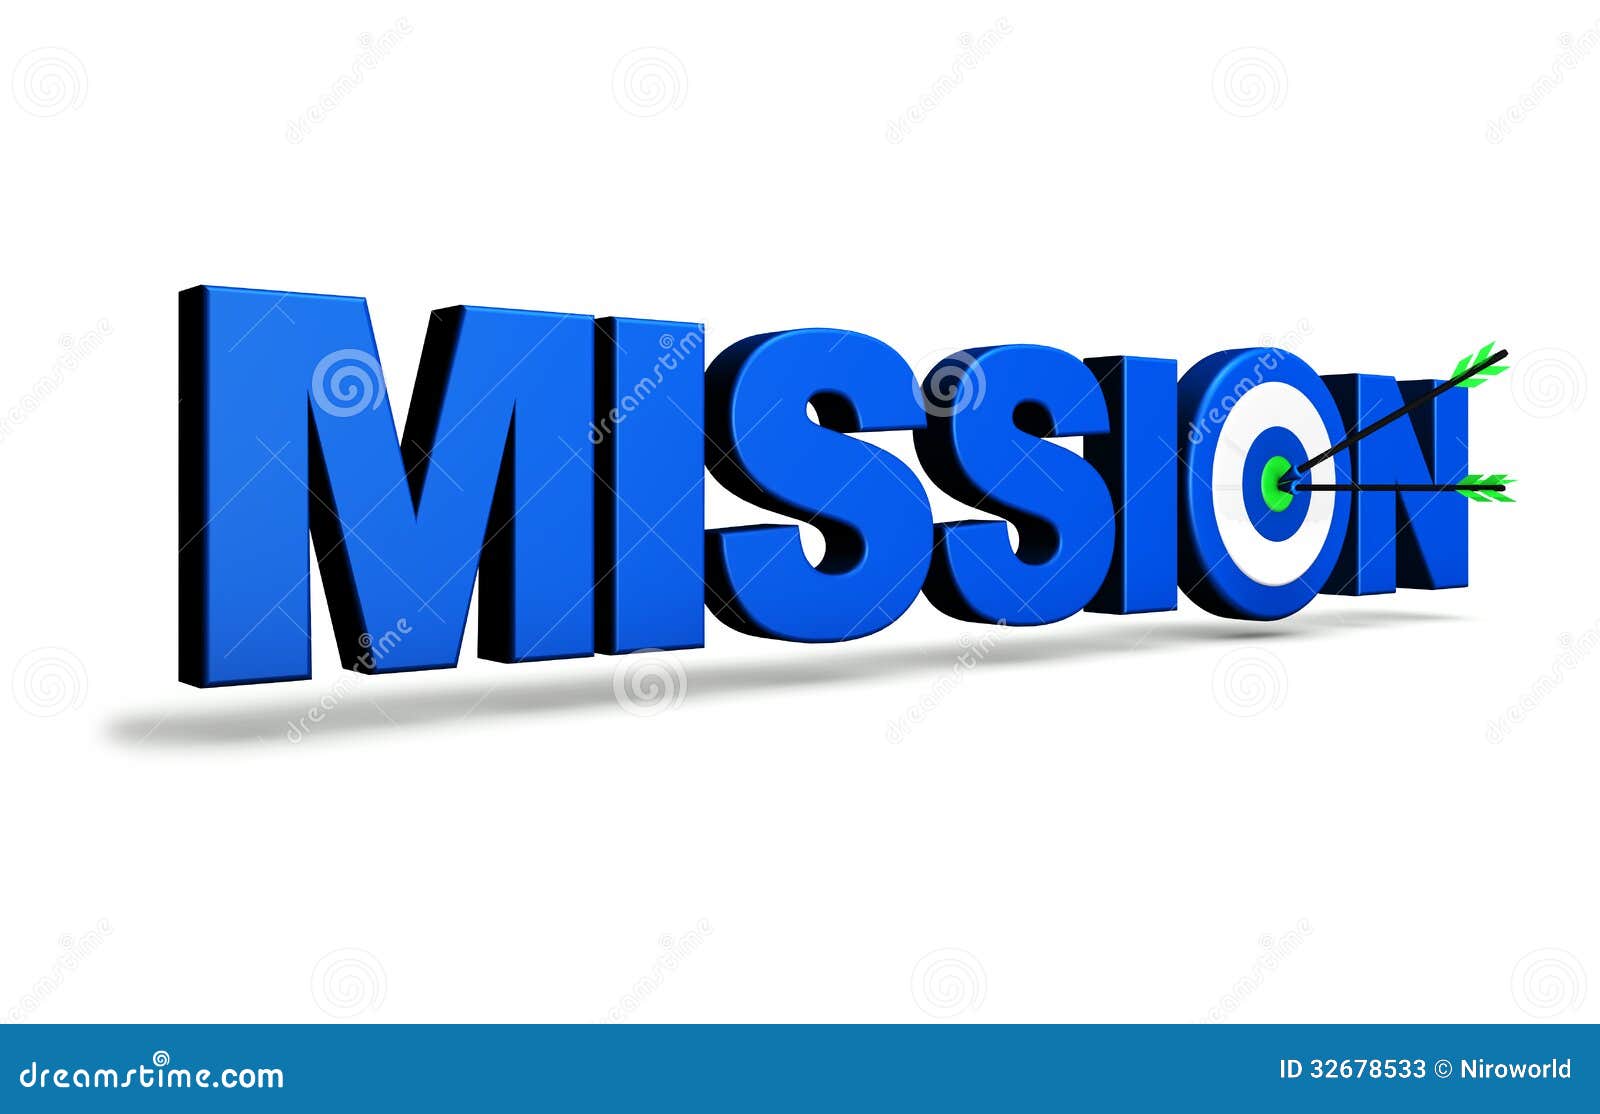 mission-target-business-concept-blue-sign-two-arrows-green-centre-isolated-white-background-32678533.jpg